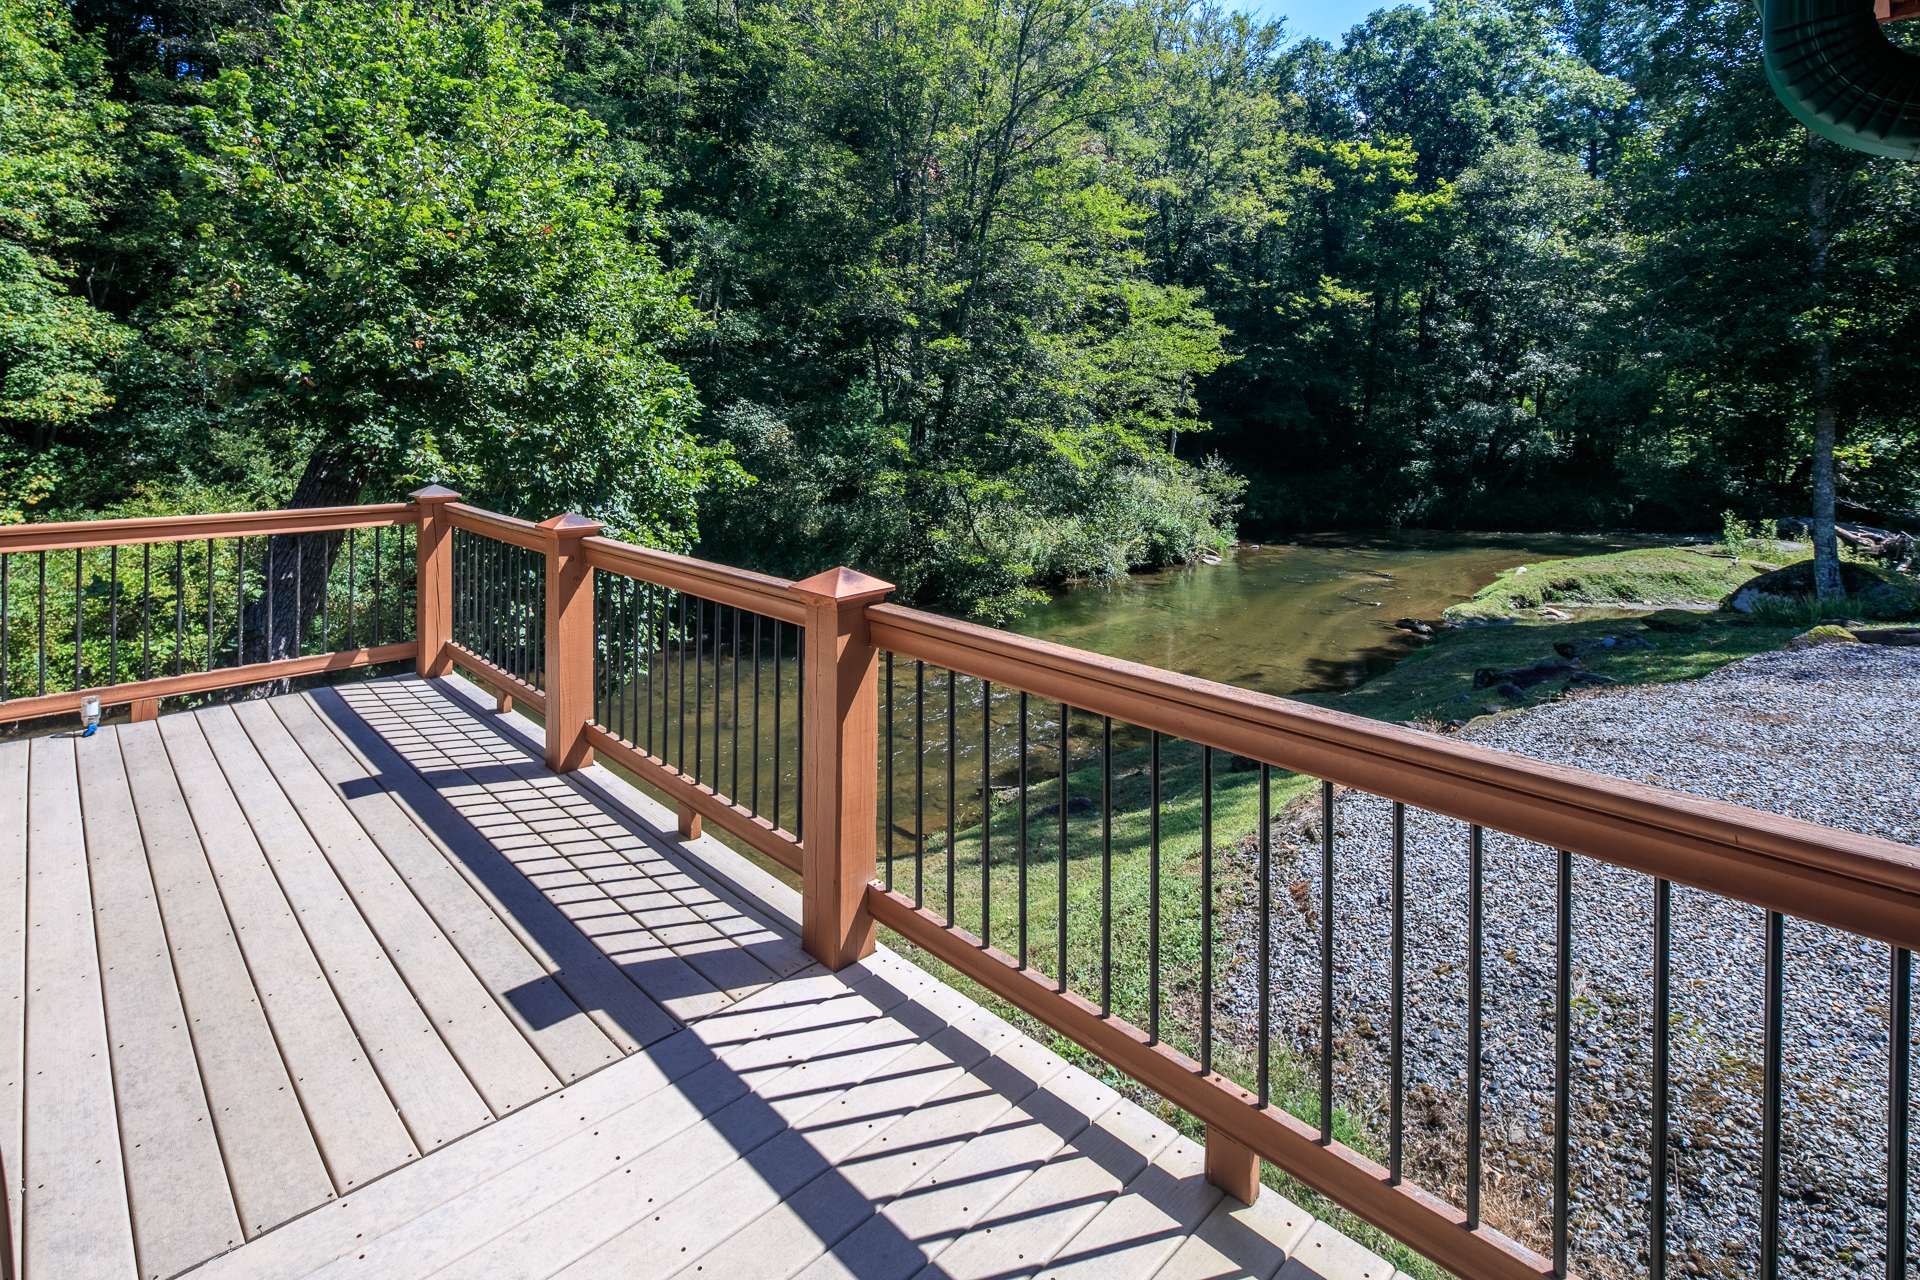 Or simply enjoy your private park-like setting with the flowing waters of Cranberry Creek below.